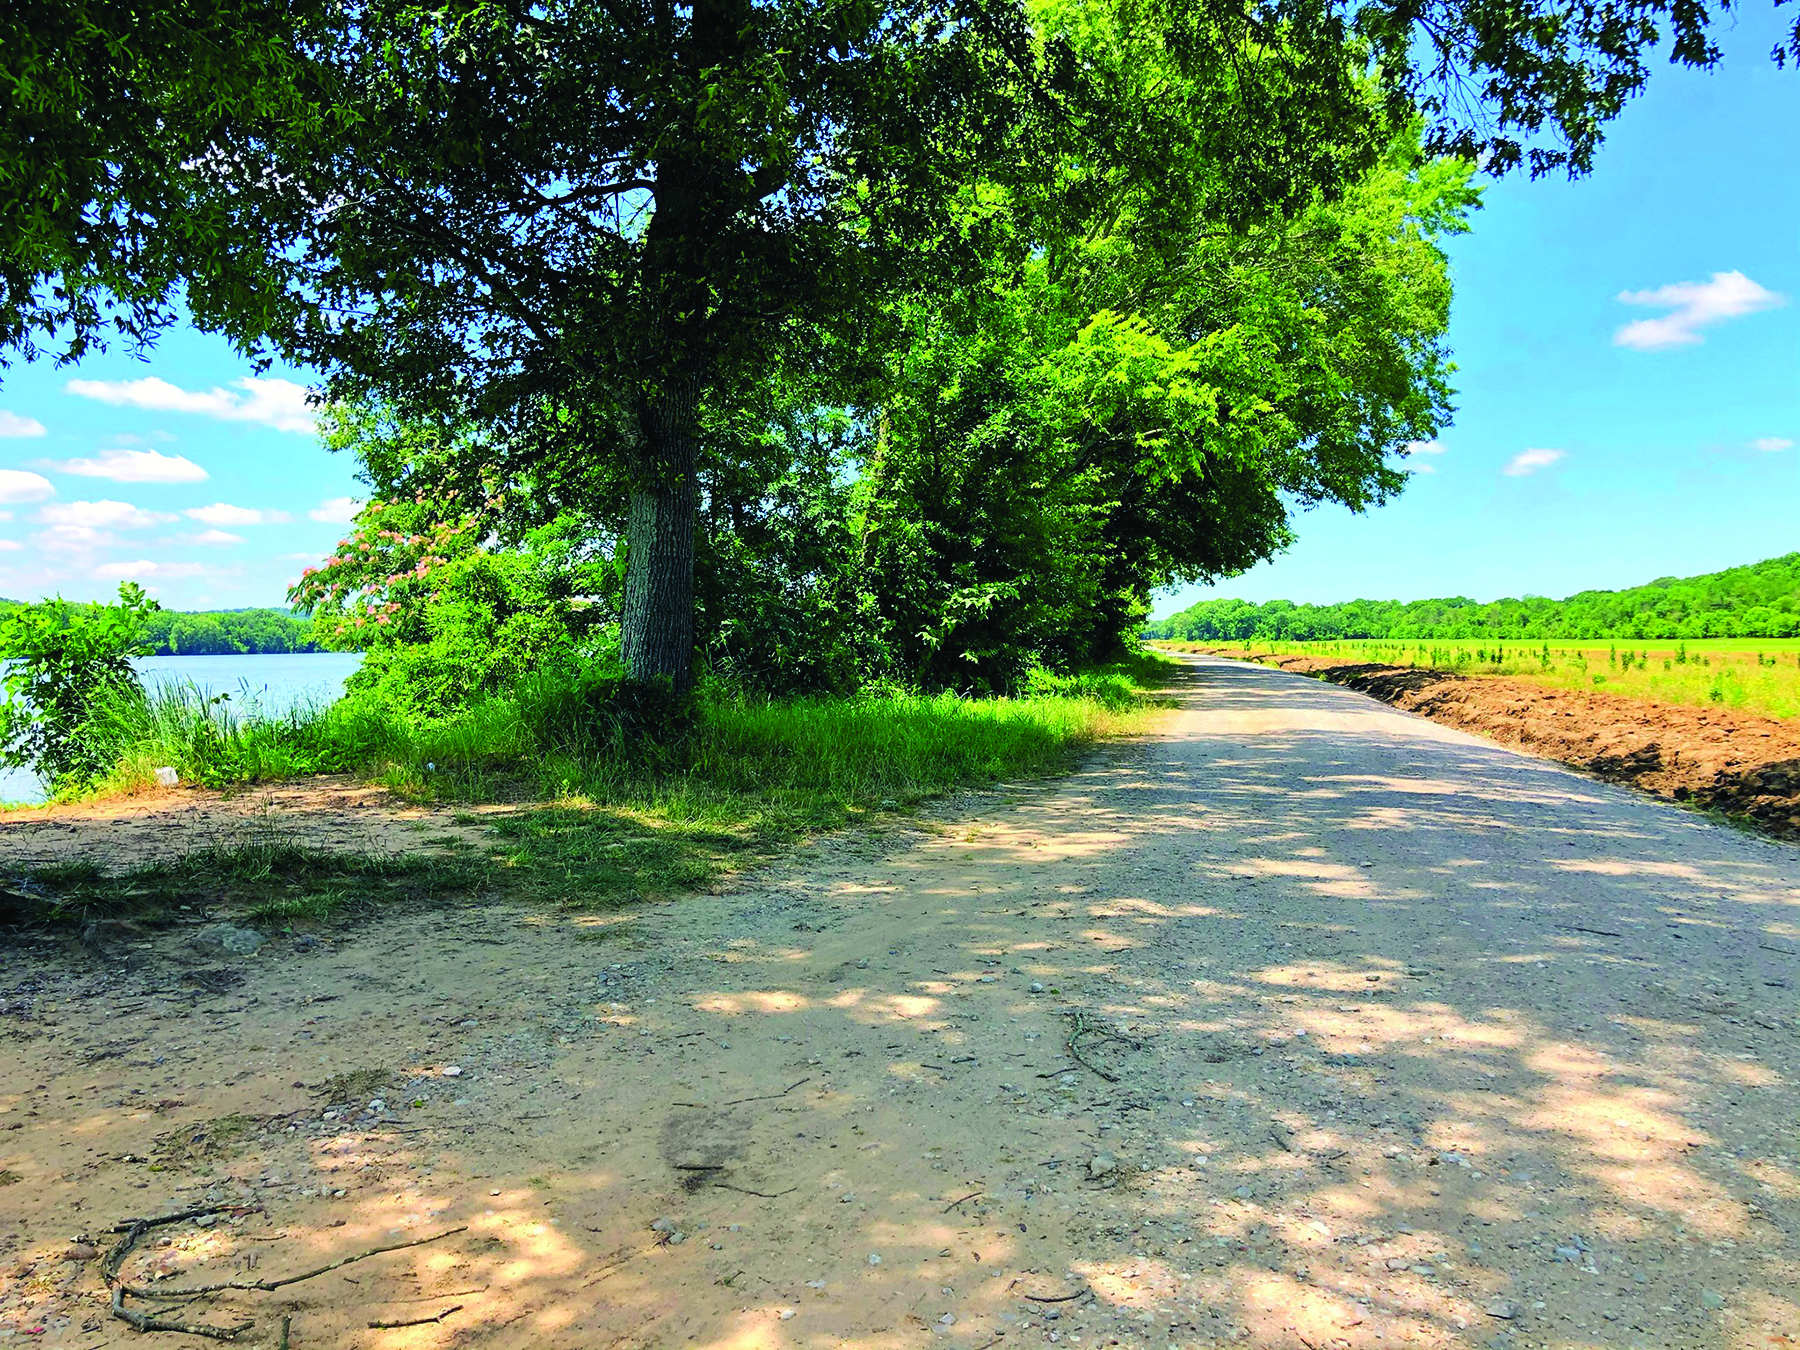 This photo shows land that will be a part of the proposed Singing River Trail, a 140-mile hiking, biking and birding trail that will link eight north Alabama counties. Photo courtesy of John Kvach